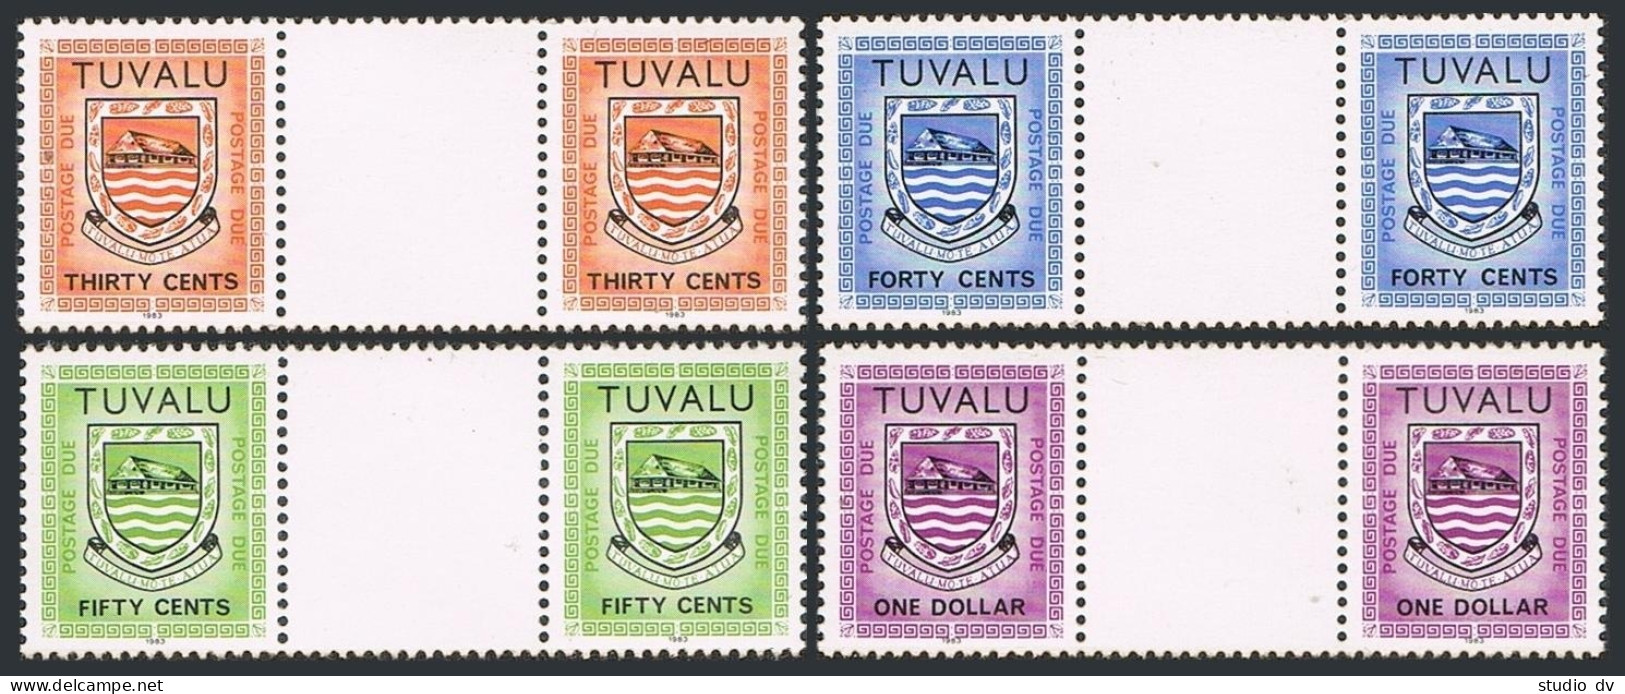 Tuvalu J6a-J9a Gutter Pair,inscribed 1983,MNH. Postage Due.Arms. - Tuvalu (fr. Elliceinseln)